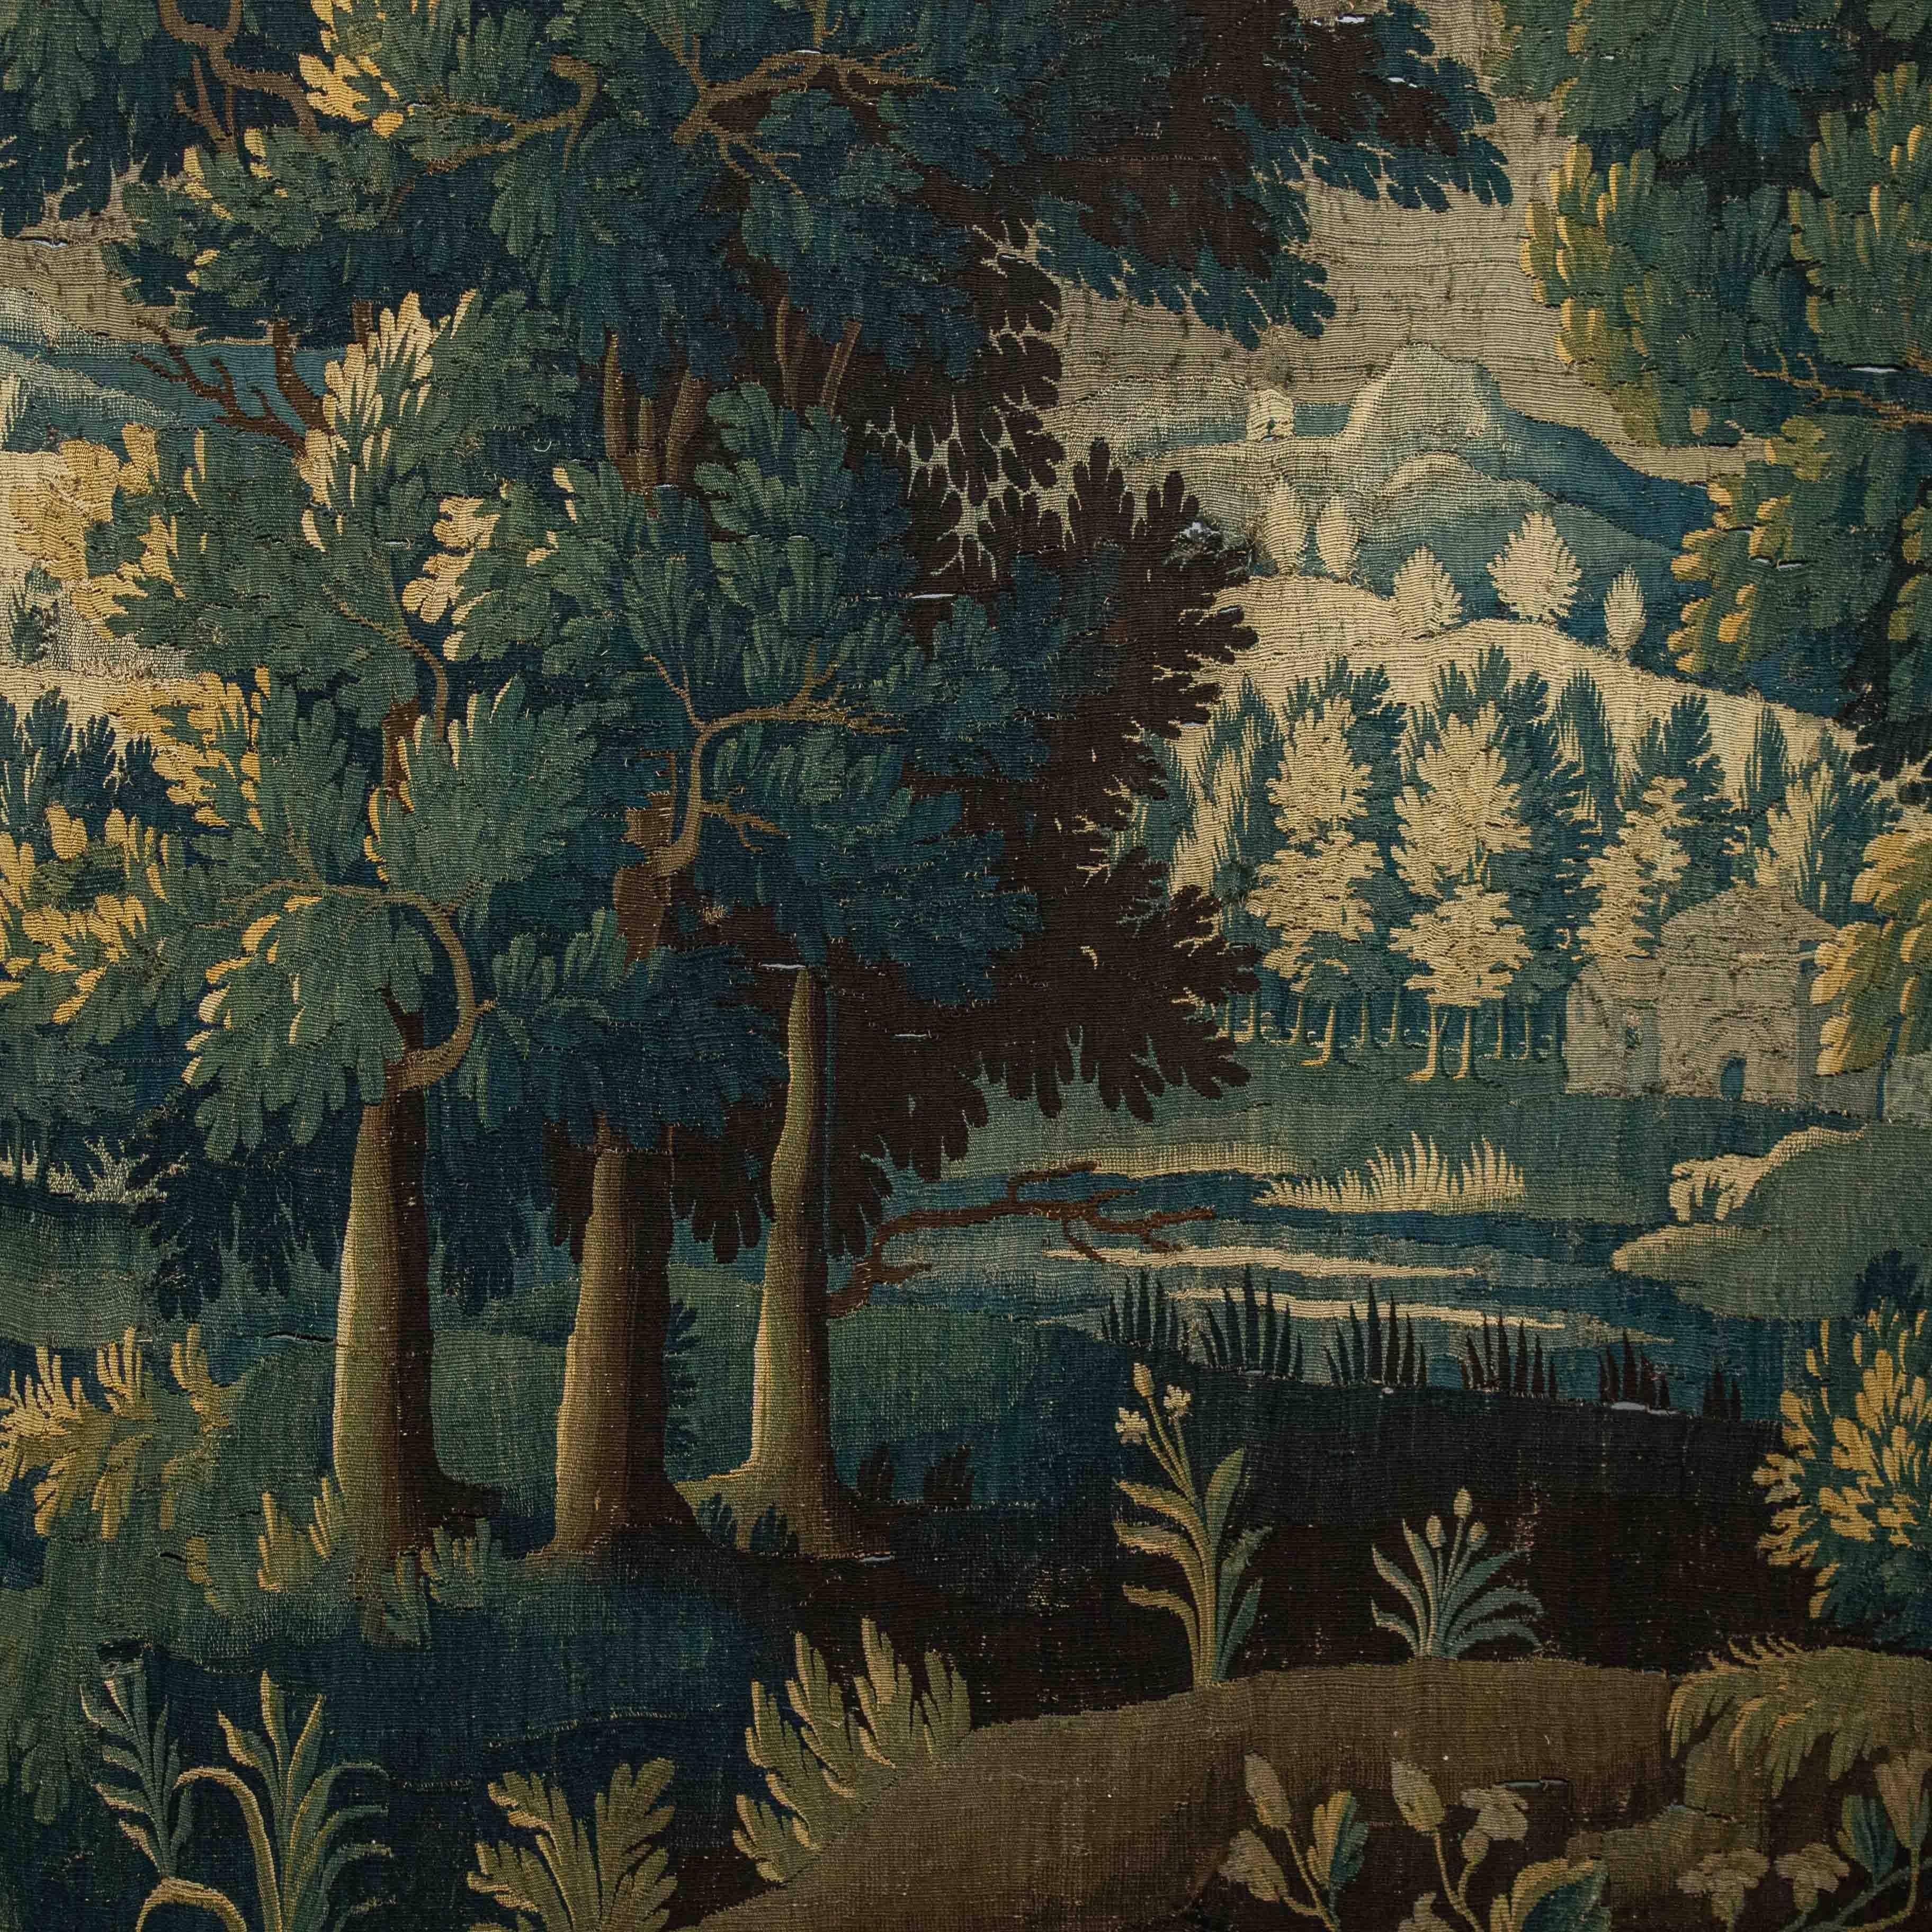 Woven 17th Century Tapestry with Landscape Aubusson Manufacture